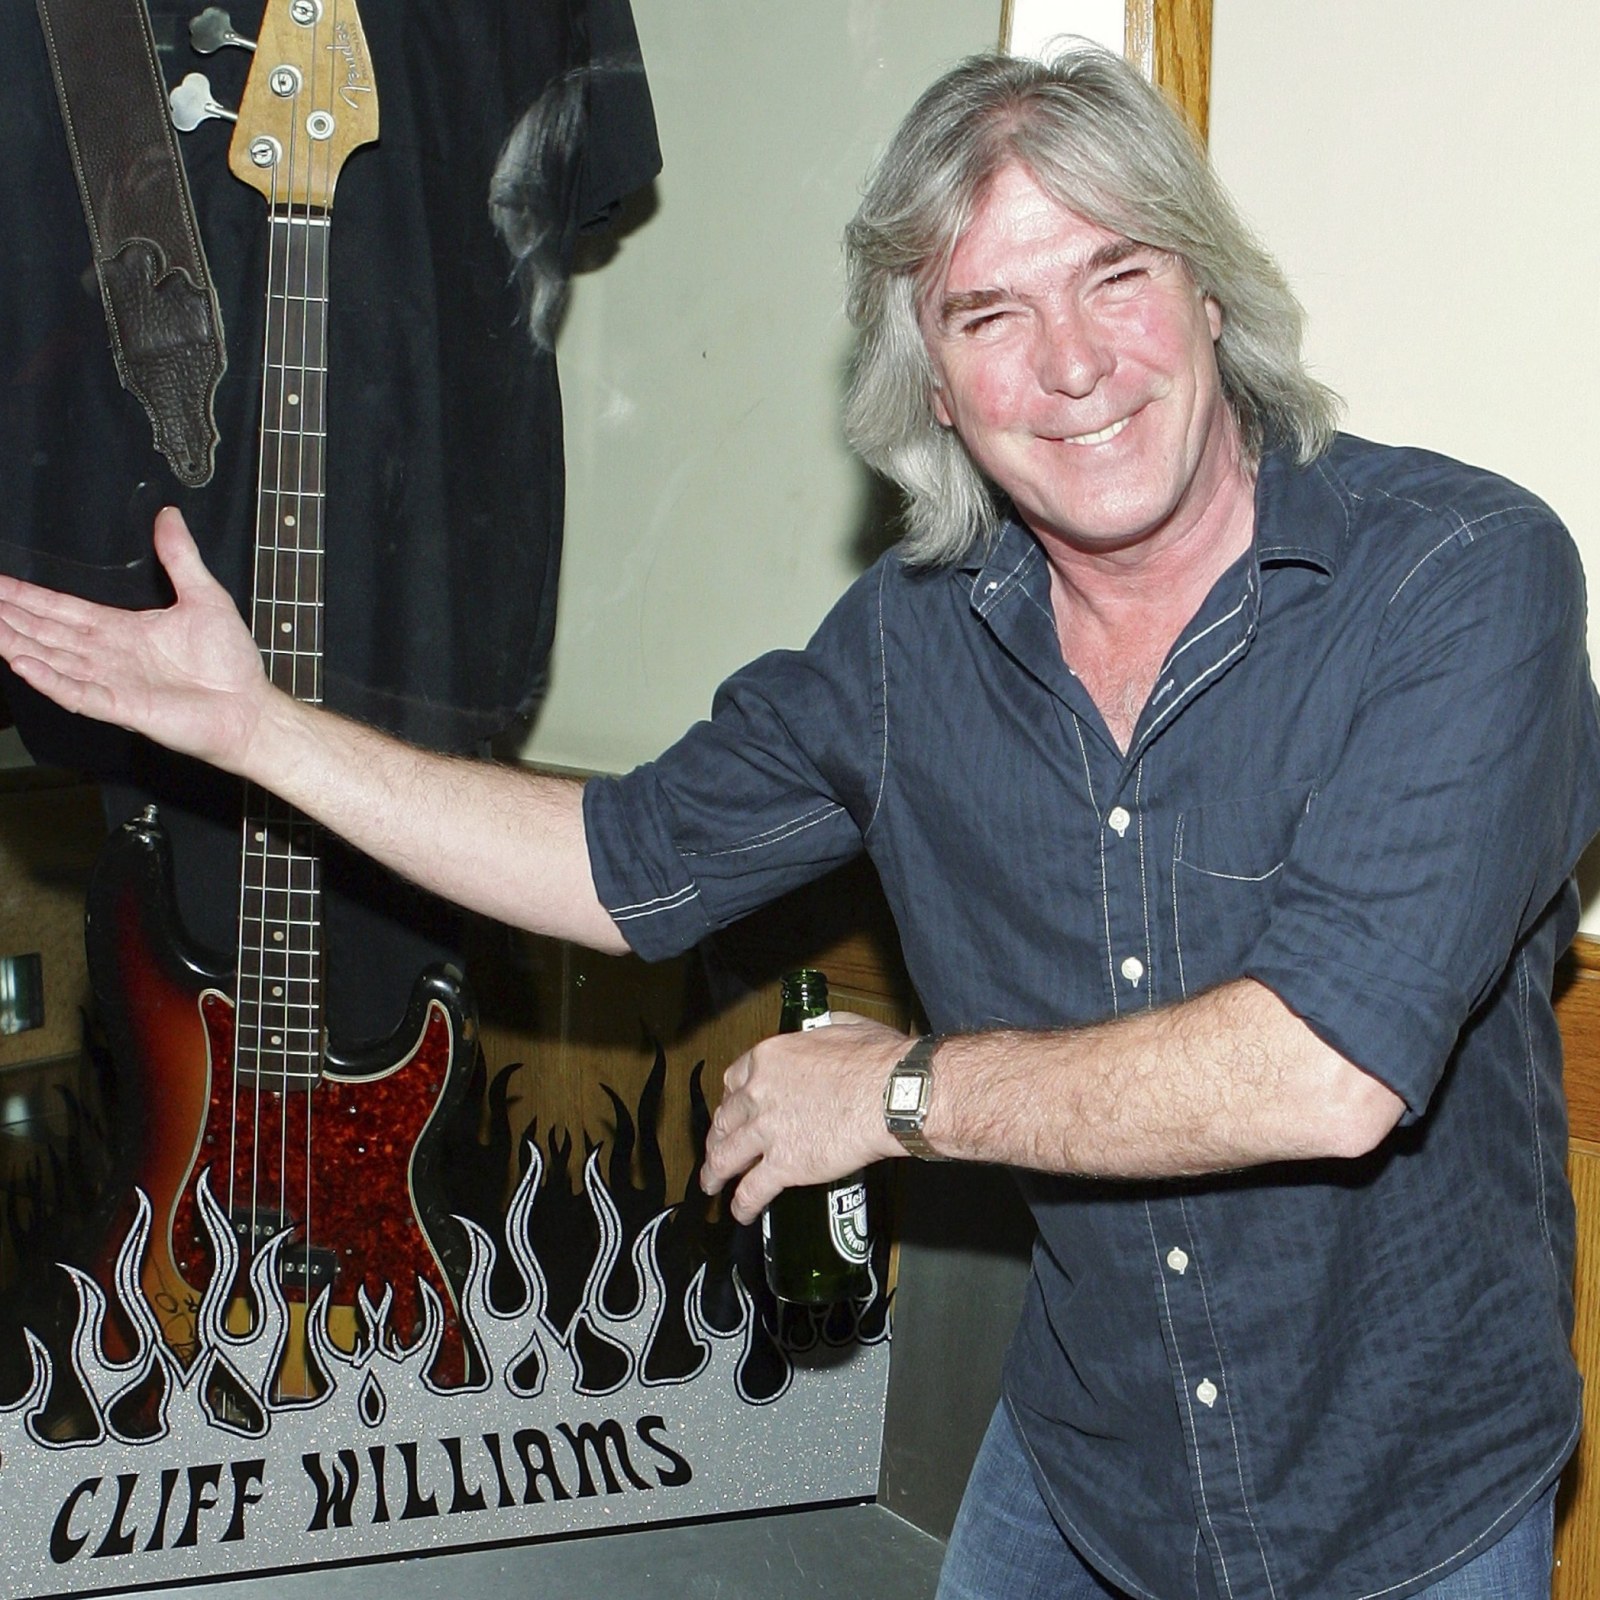 AC/DC bassist Cliff Williams says he is retiring, AC/DC